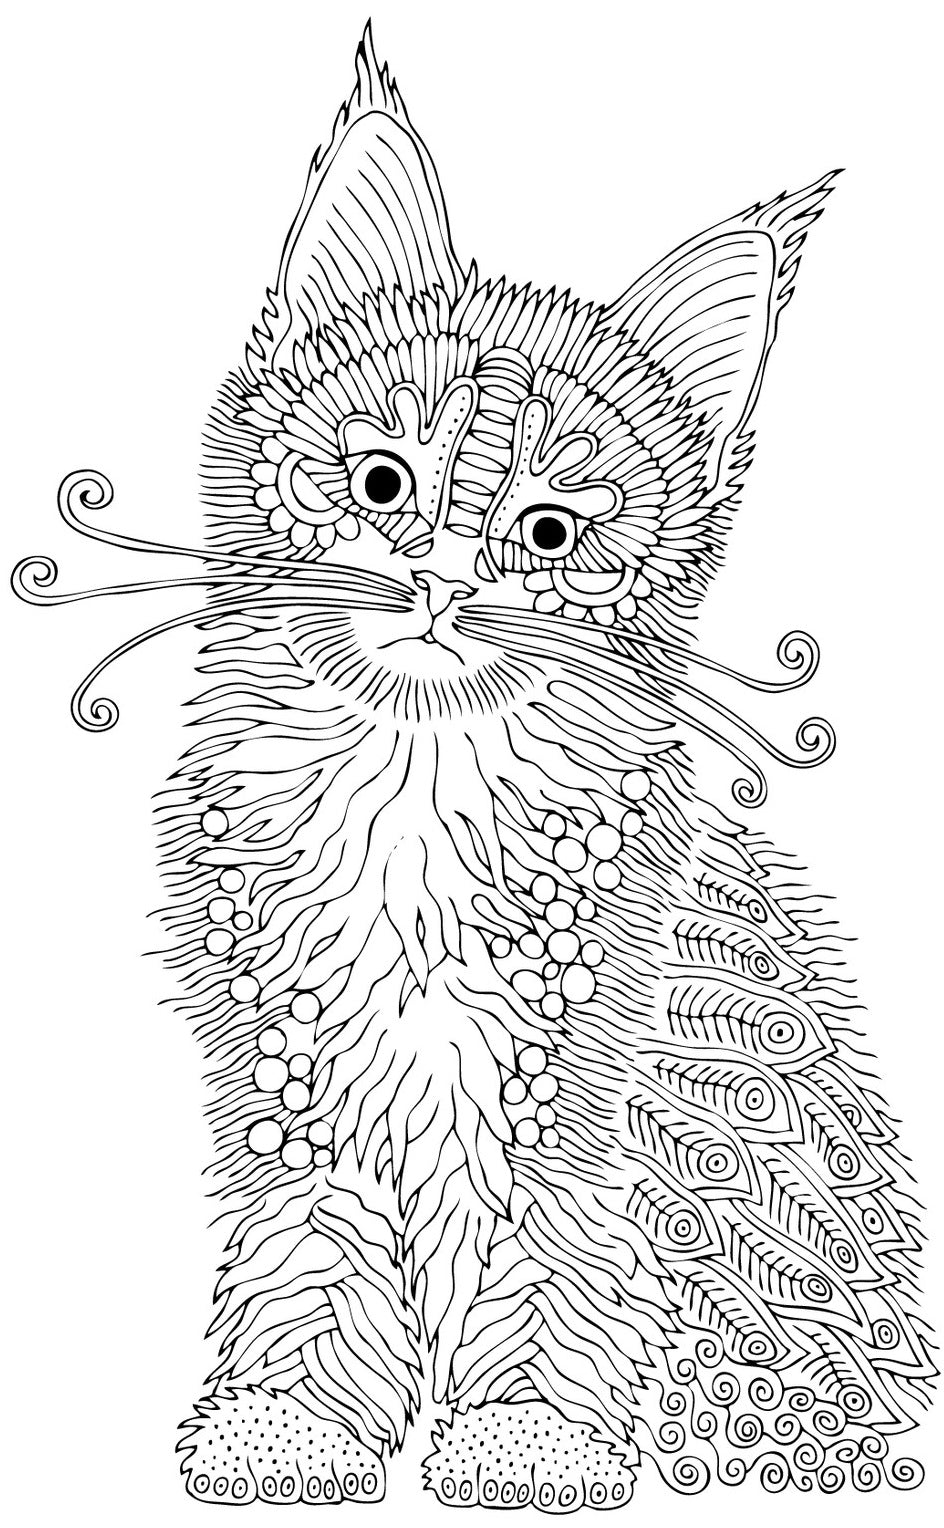 Adorable Kitty Cat with a Bow coloring page | Free Printable Coloring Pages